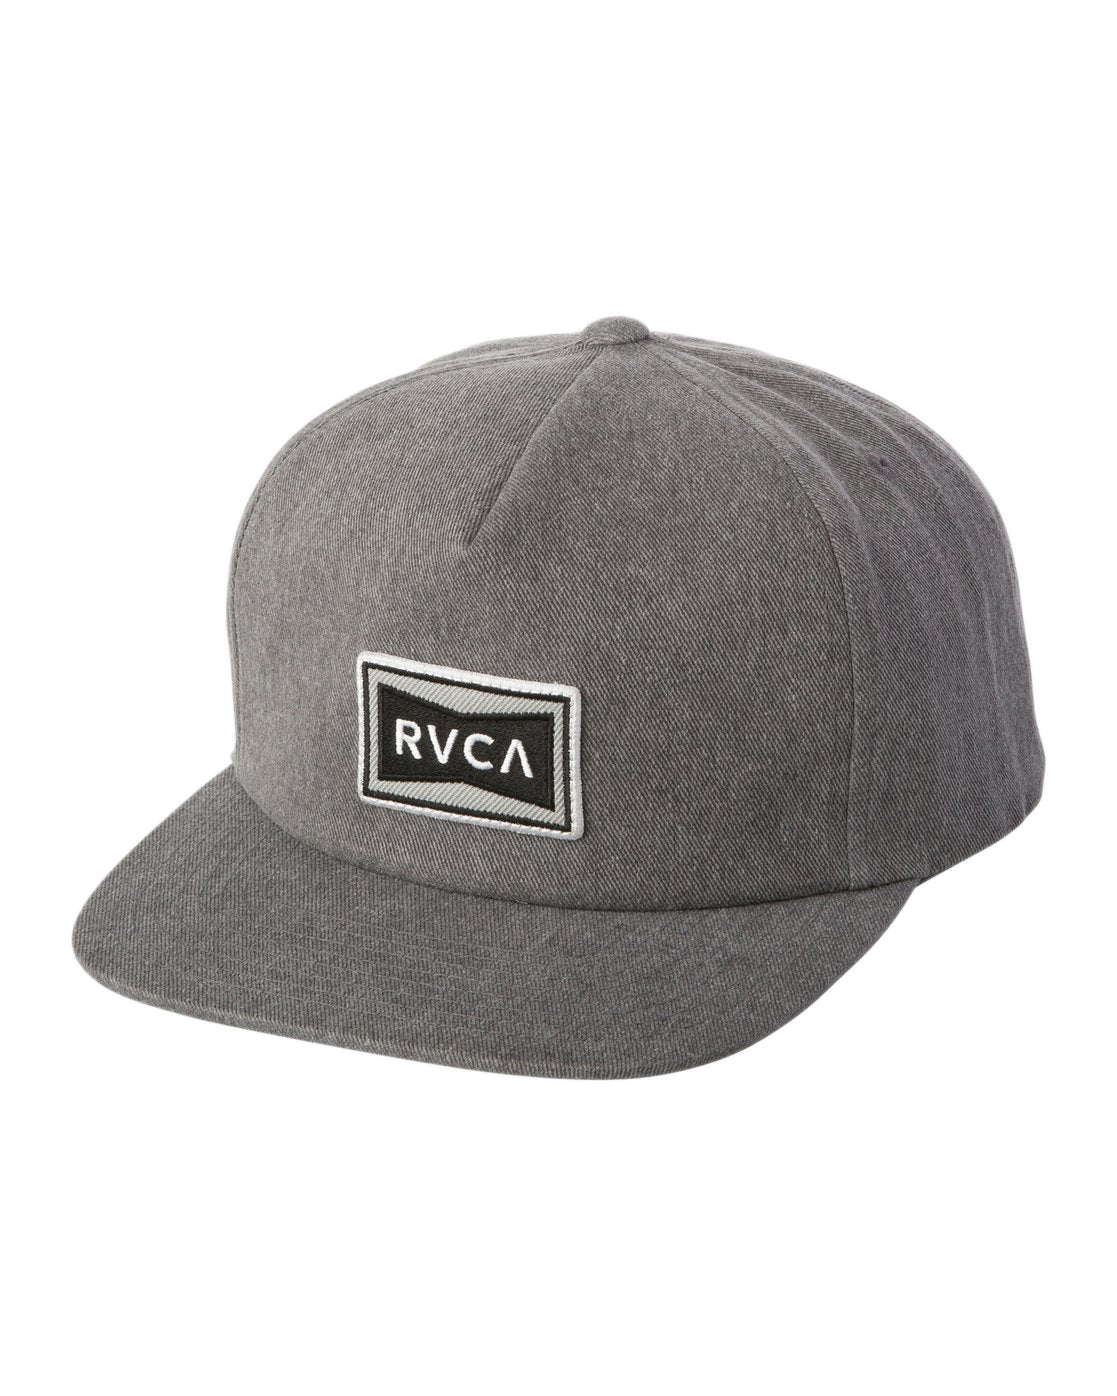 RVCA Pace Mens Hat GRY-Grey OS